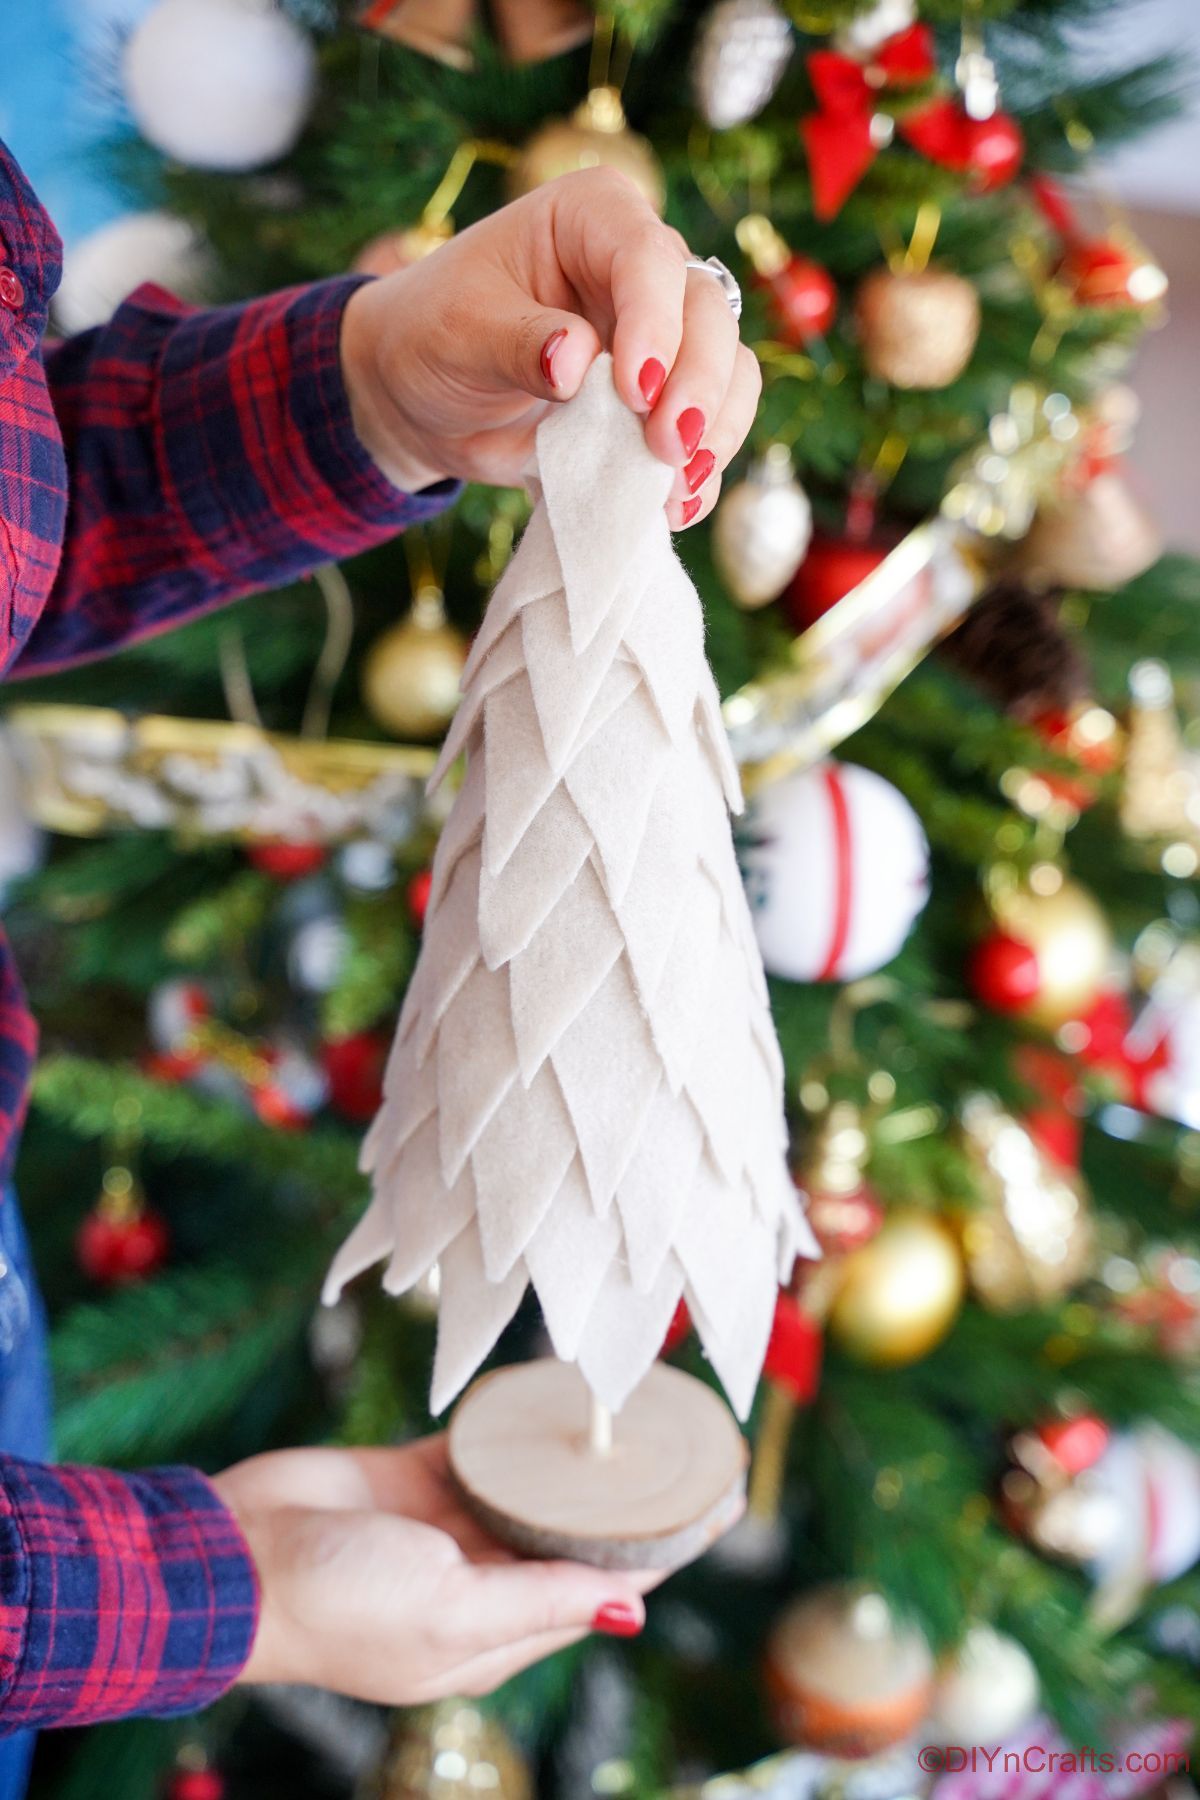 cream fabric christmas tree being held in front of holiday tree with ornaments